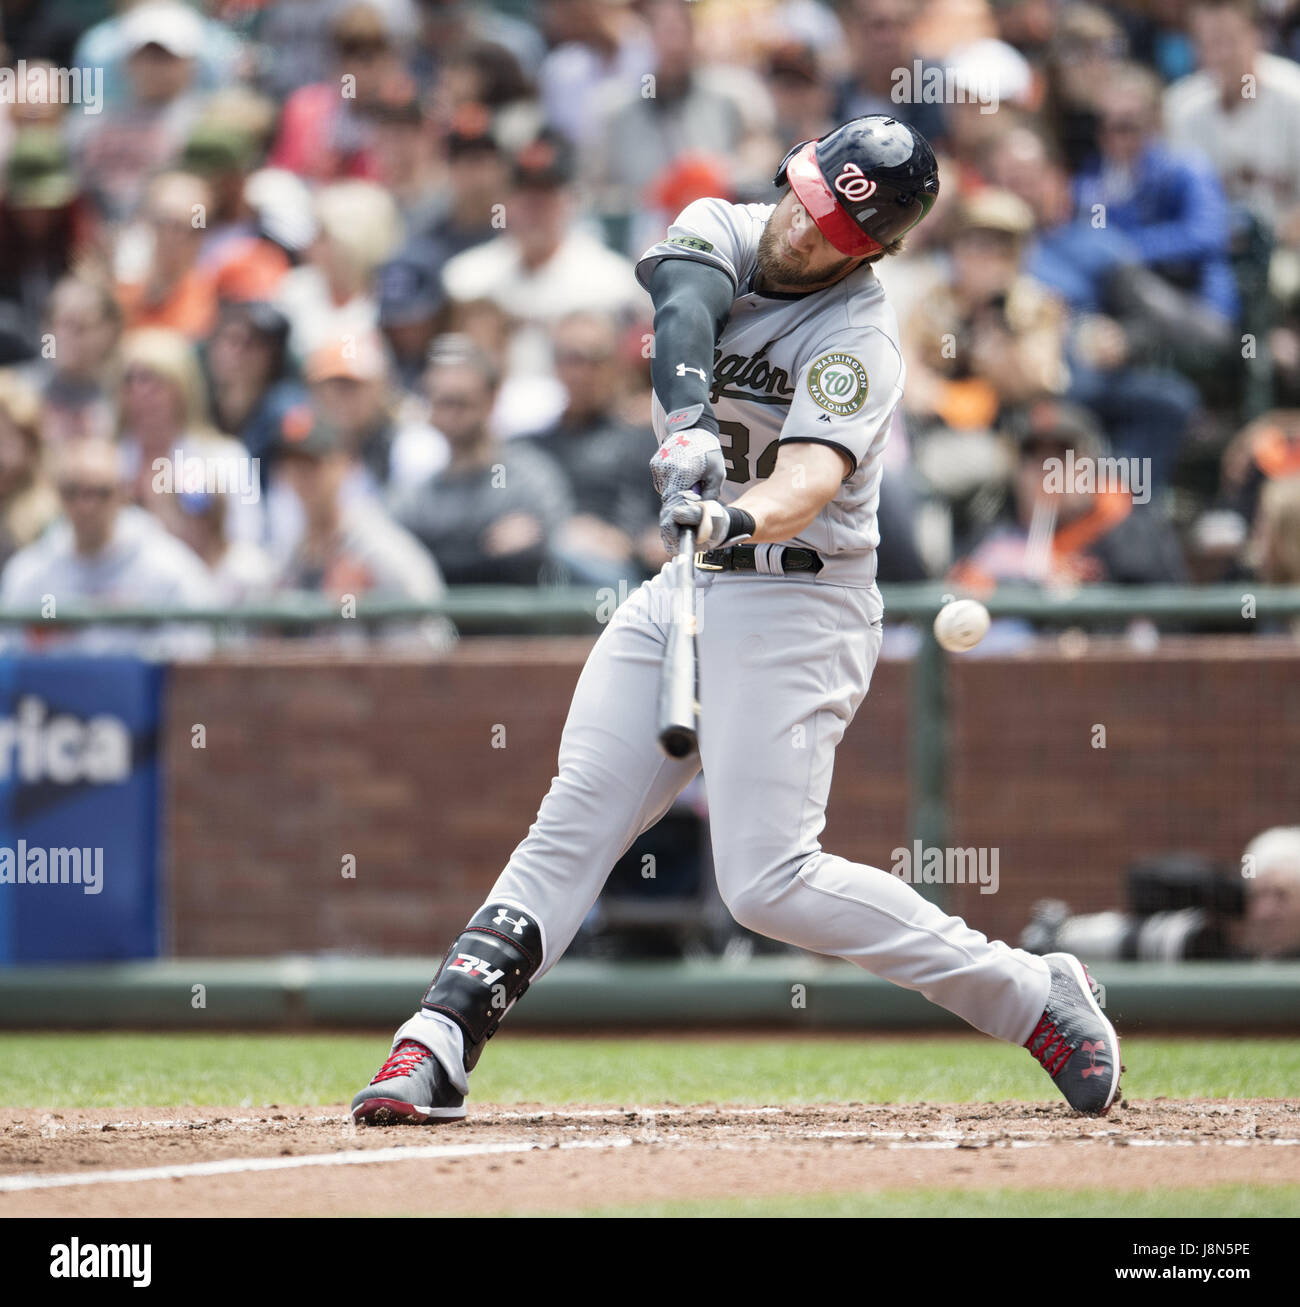 May 29, 2017: Washington Nationals right fielder Bryce Harper (34) hitting a foul ball, during a MLB baseball game between the Washington Nationals and the San Francisco Giants on Memorial Day at AT&T Park in San Francisco, California. Harper was later thrown out of the game for fighting with relief pitcher Hunter Strickland (60). Valerie Shoaps/CSM Stock Photo